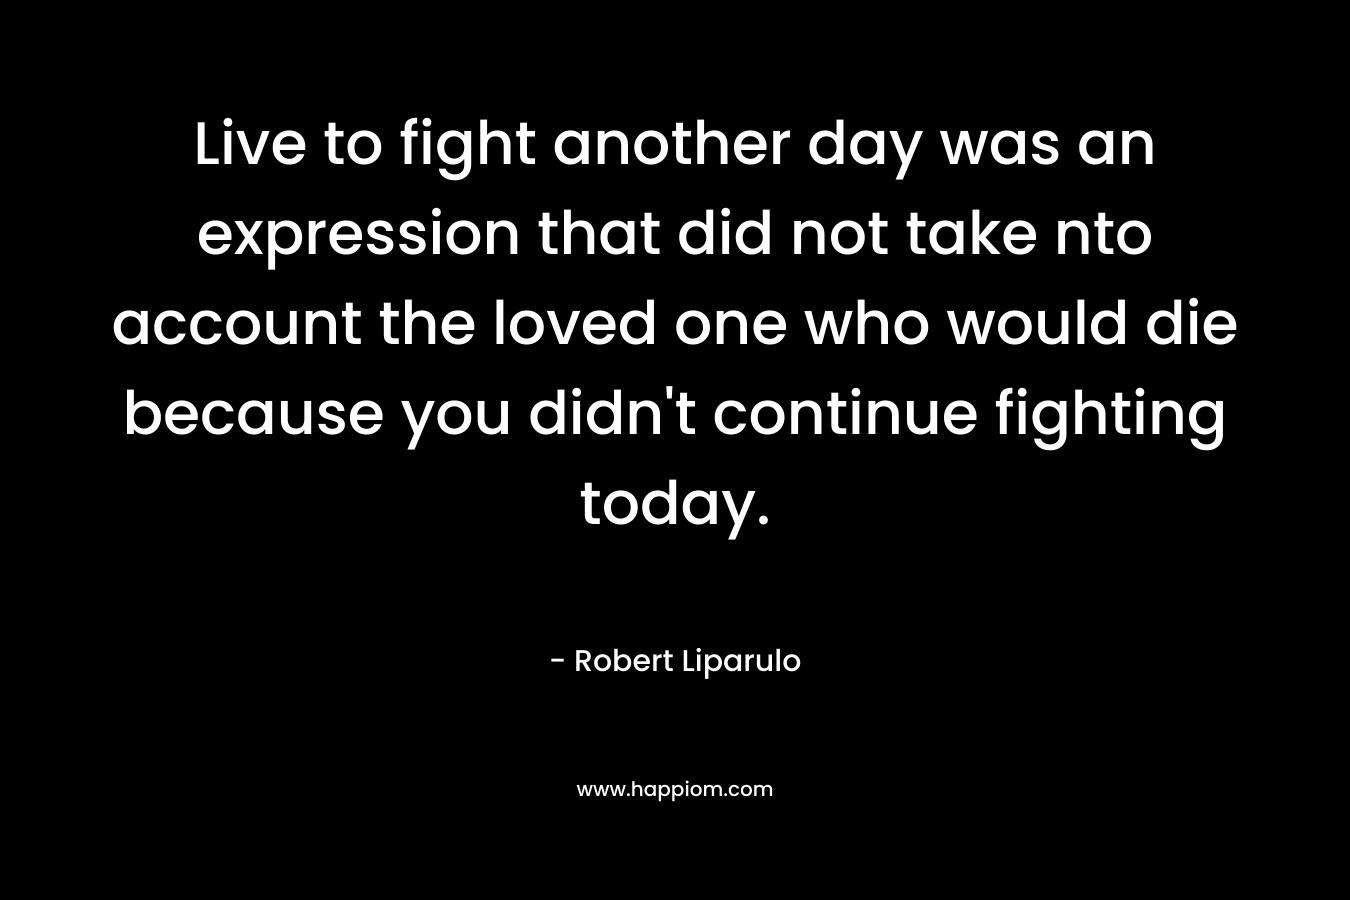 Live to fight another day was an expression that did not take nto account the loved one who would die because you didn’t continue fighting today. – Robert Liparulo